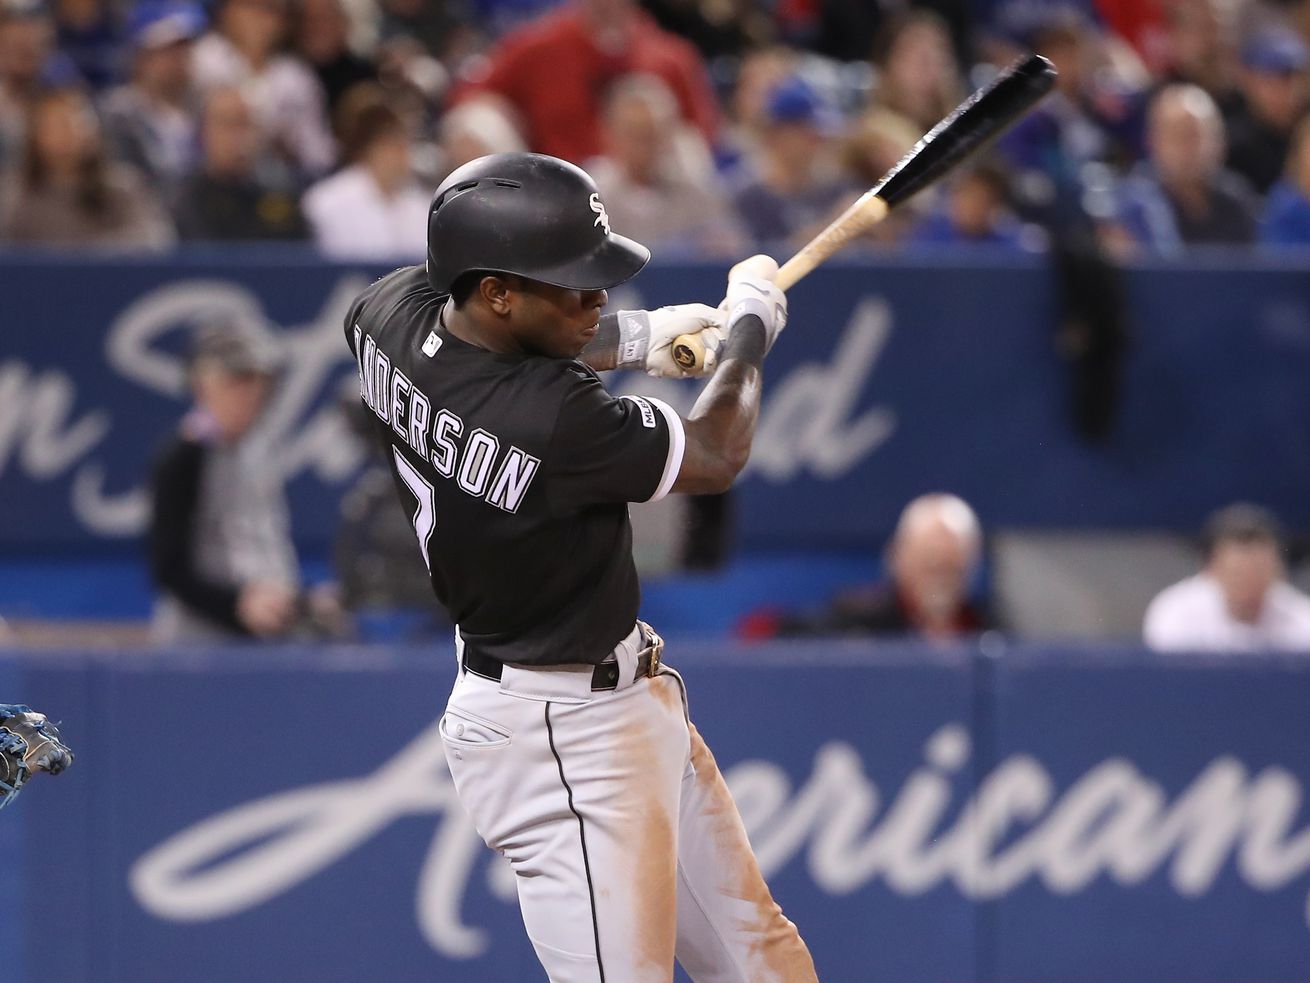 White Sox shortstop Tim Anderson isn’t about to apologize for any home run.